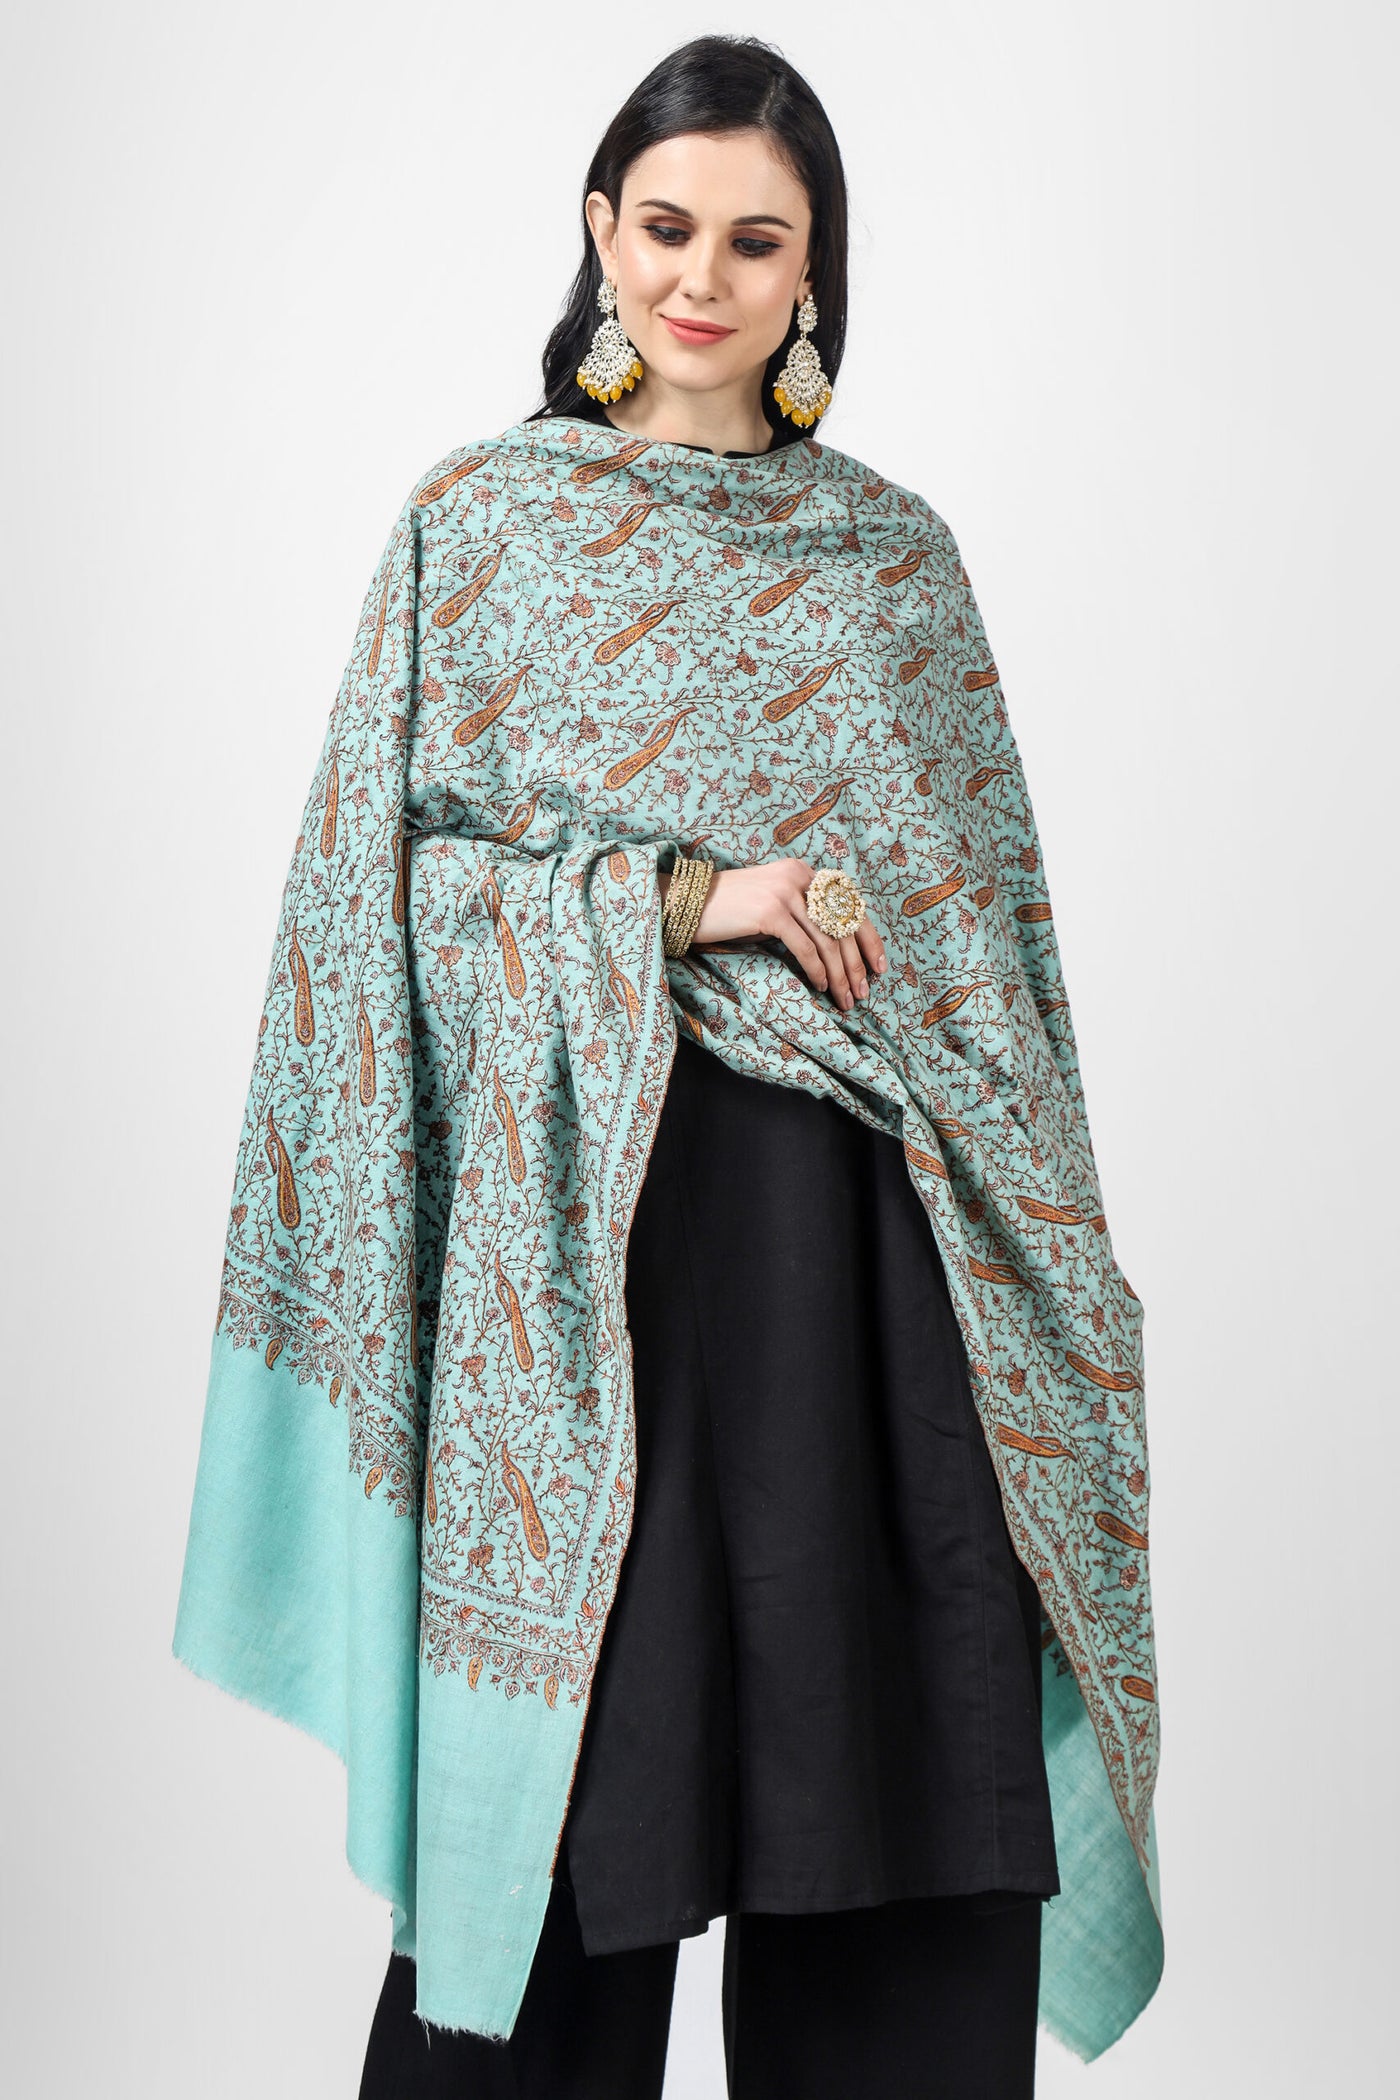  Indulge in luxury with this exquisite turquoise handmade Pashmina Shawl adorned with intricate Sozni embroidery in a Jaldaar pattern, crafted from the finest natural pashmina wool This shawl features charming Sozni silk threads in vivid floral vines that form symmetrical patterns,